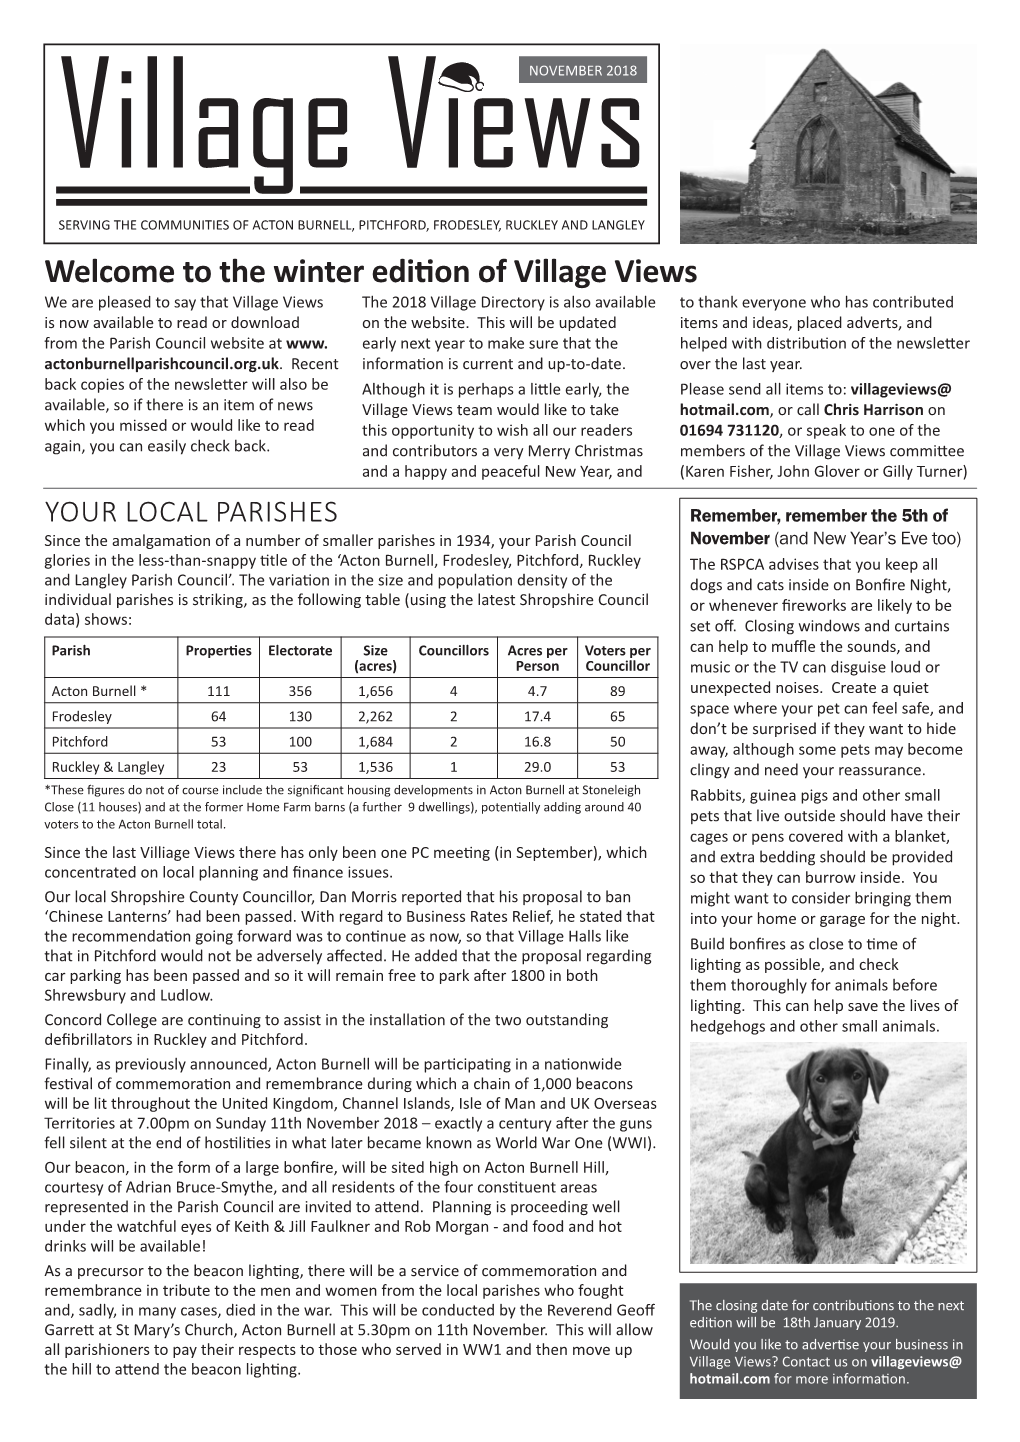 The Winter Edition of Village Views